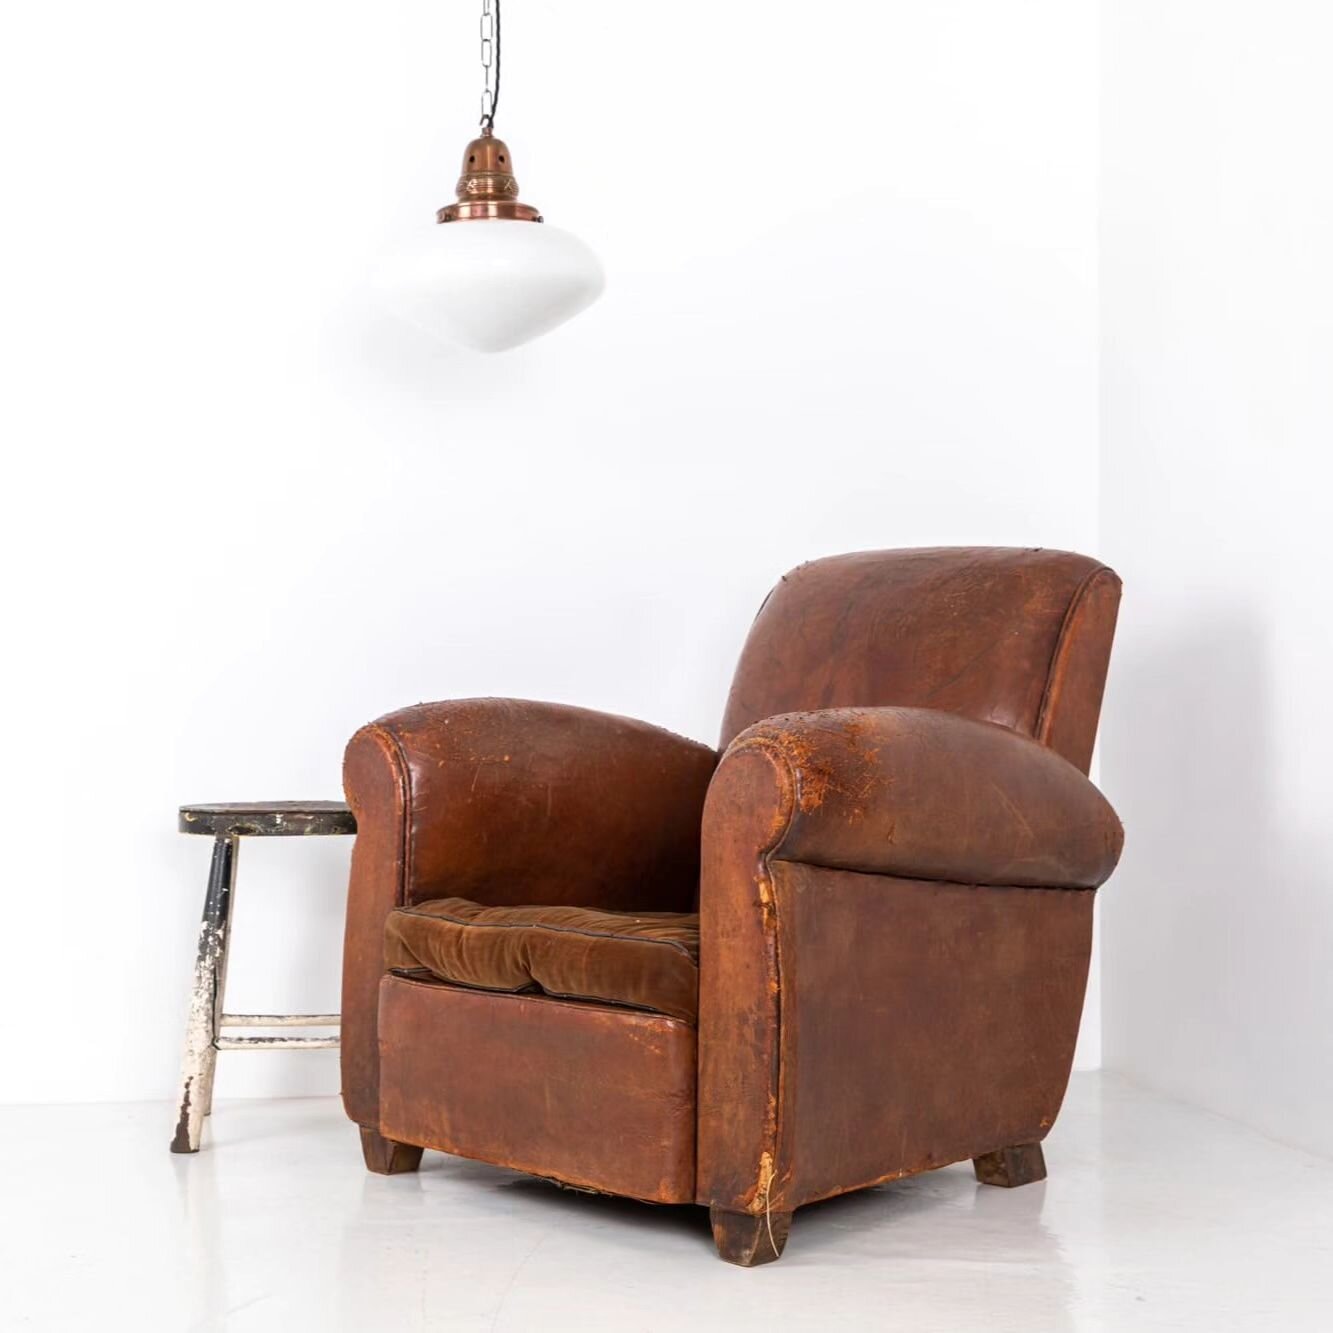 Ridiculously comfy leather club chair. Nicely worn and super soft leather with squab cushion. This thing swallows you up when you sit in it 🤤

#antiquesworkshop #vintageindustrial #antique #vintage #midcentury #antiques #midcenturymodern #interiorde